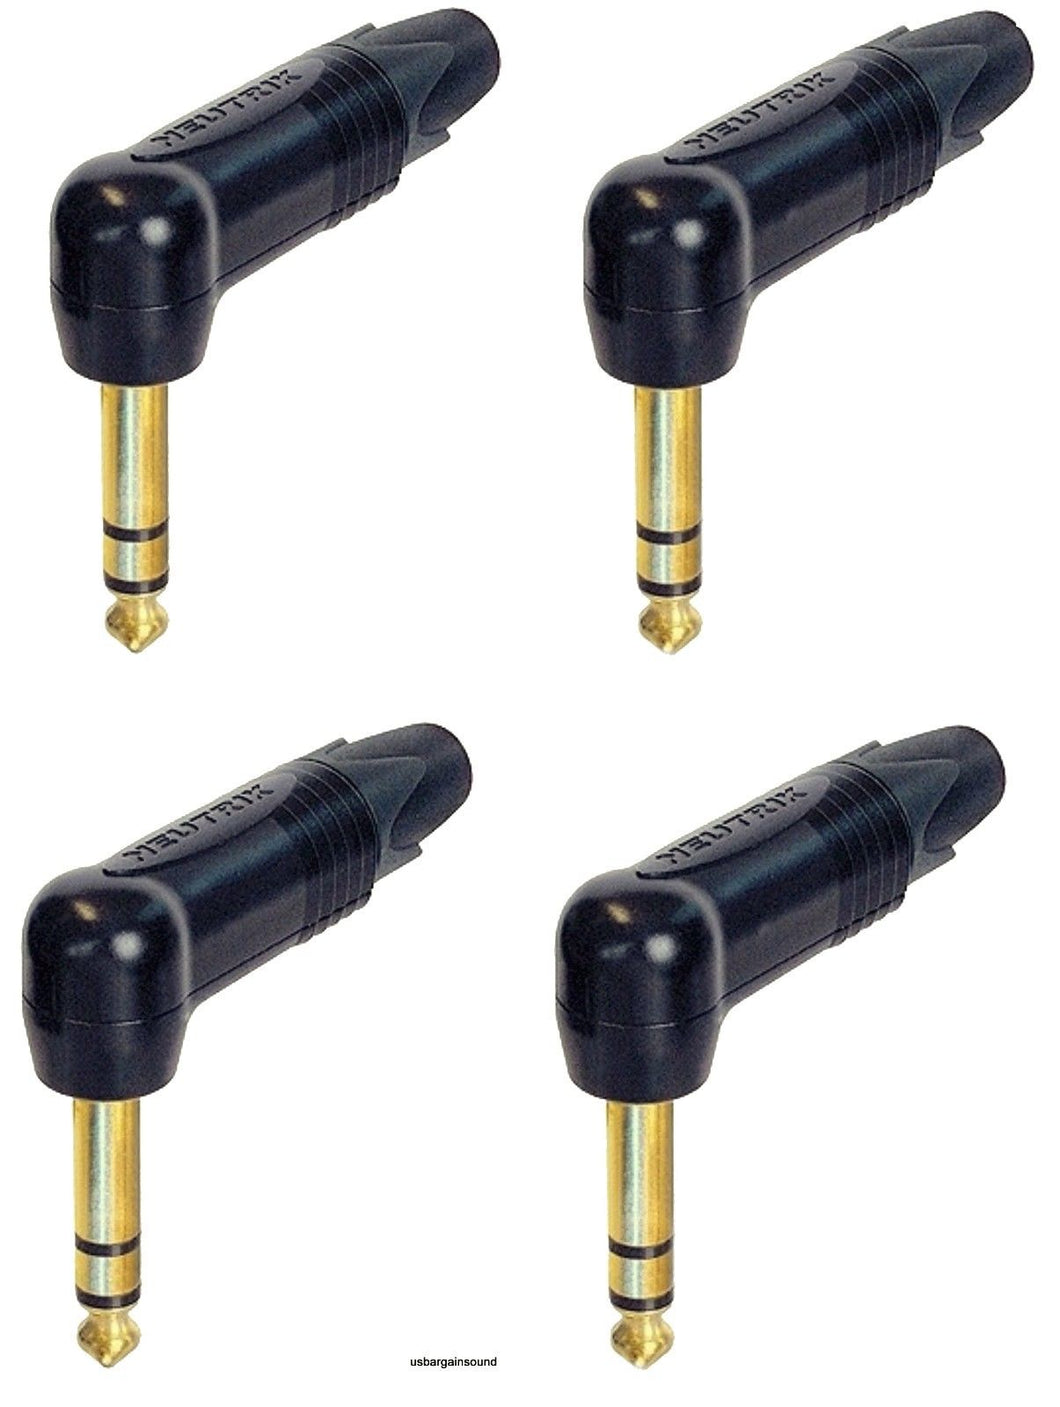 4 - Neutrik NP3RX-B Stereo Right Angle 1/4 Inch Plug Gold Contacts & Black Shell